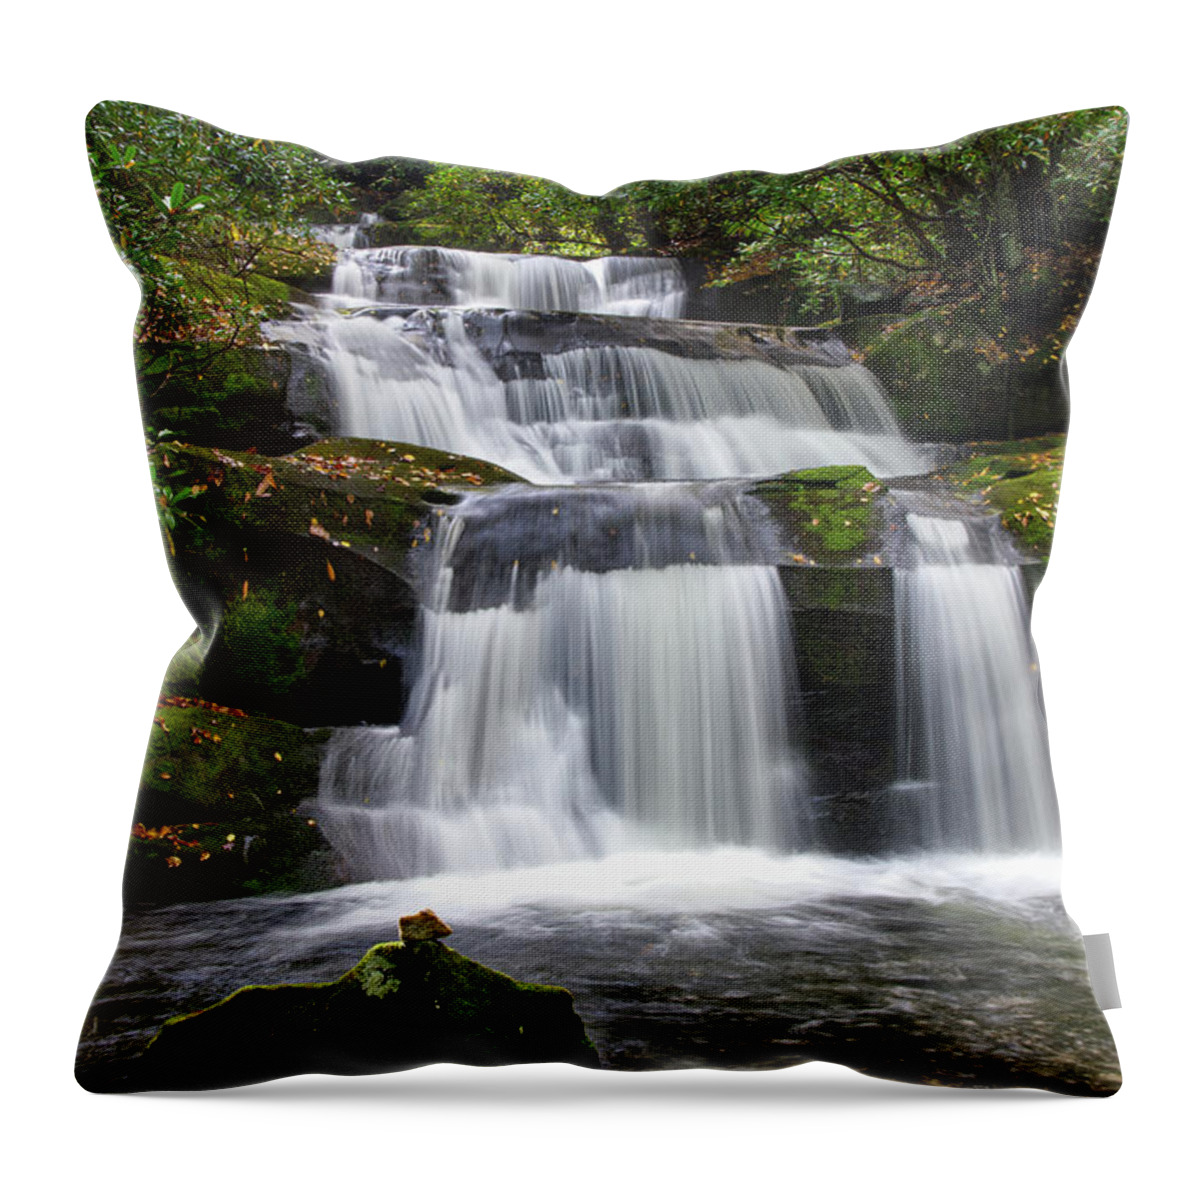 Indian Flats Falls Throw Pillow featuring the photograph Indian Flats Falls 4 by Phil Perkins